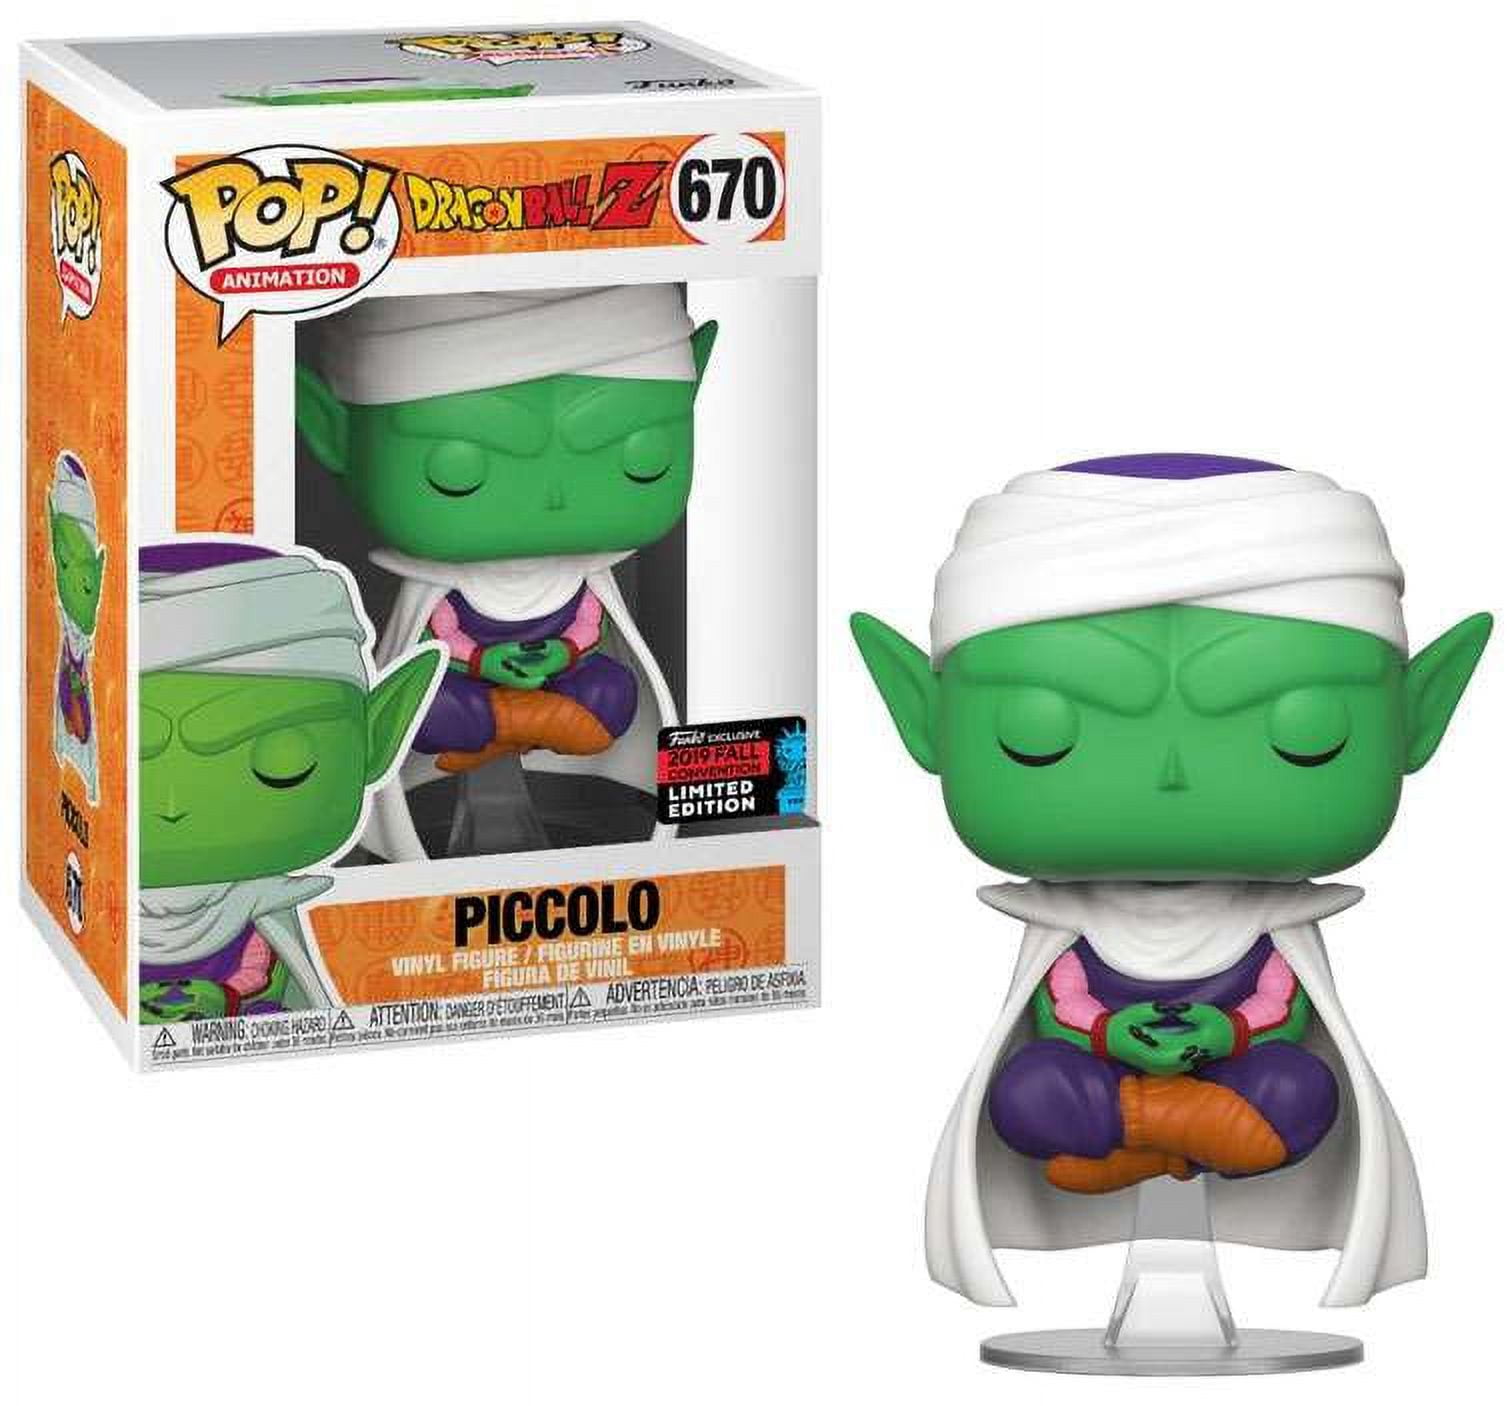 Piccolo's Plan  Watch on Funimation